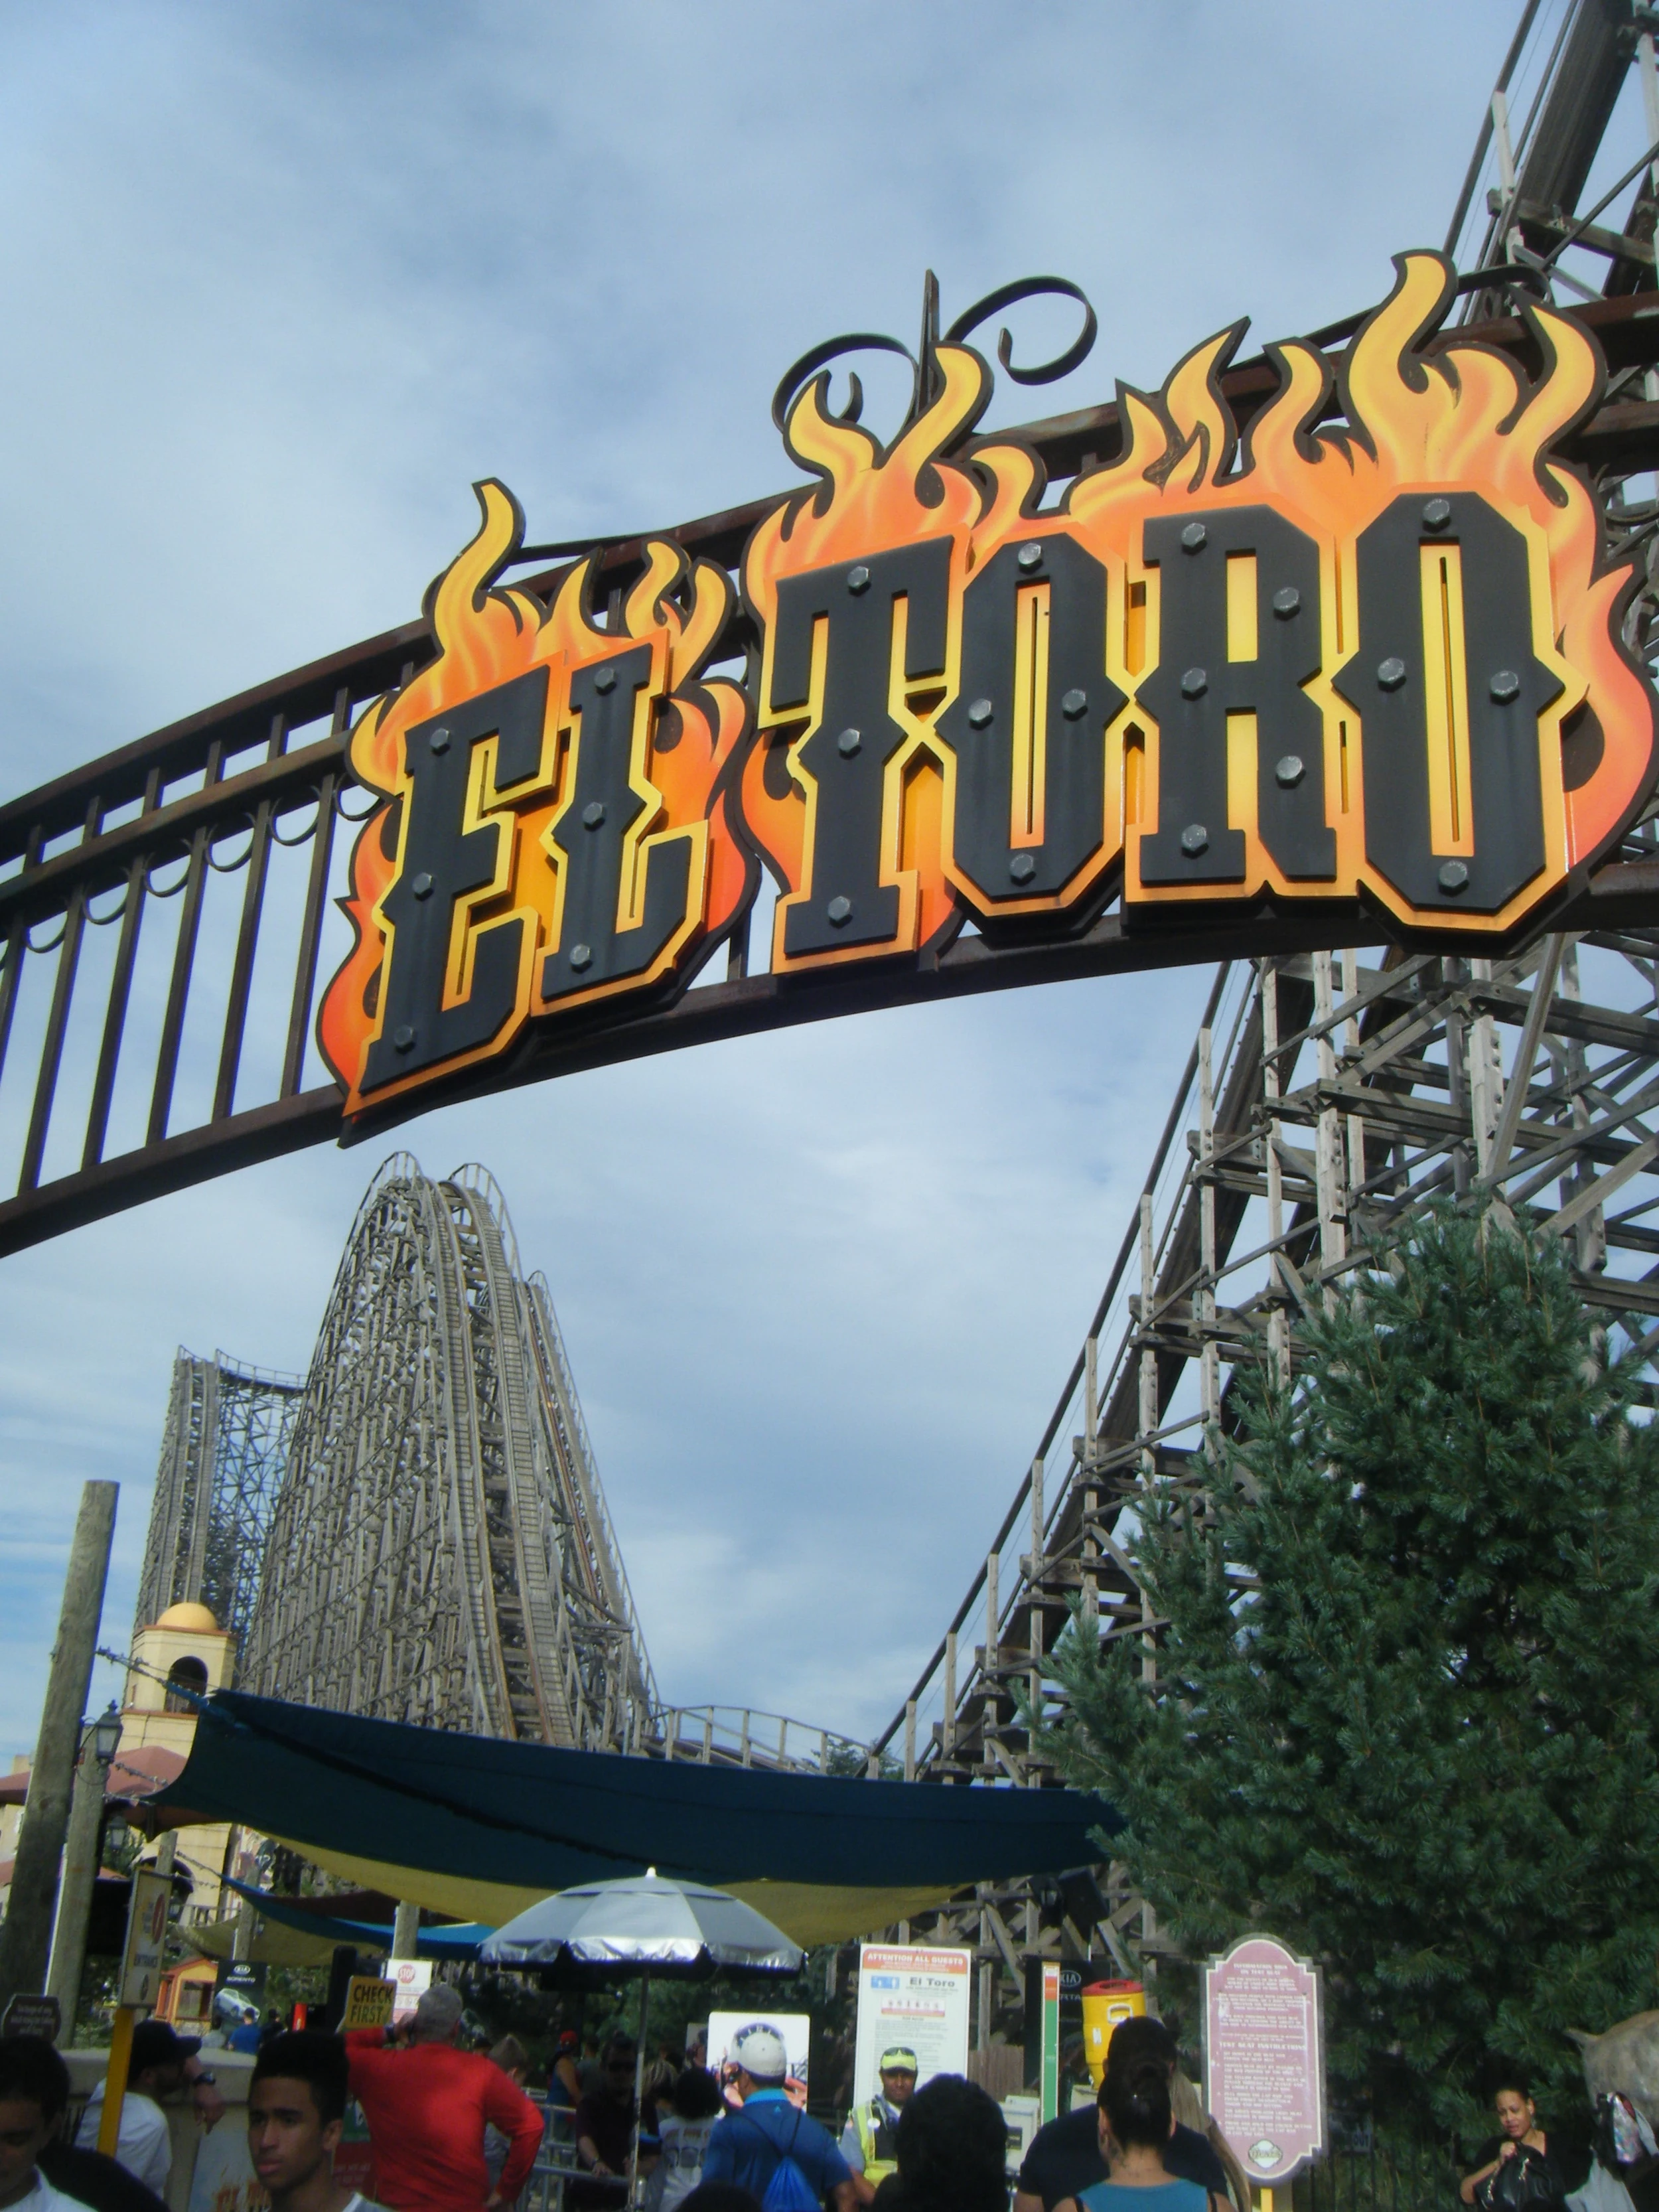 Popular Six Flags Ride, El Toro, Will be Back Online In Spring